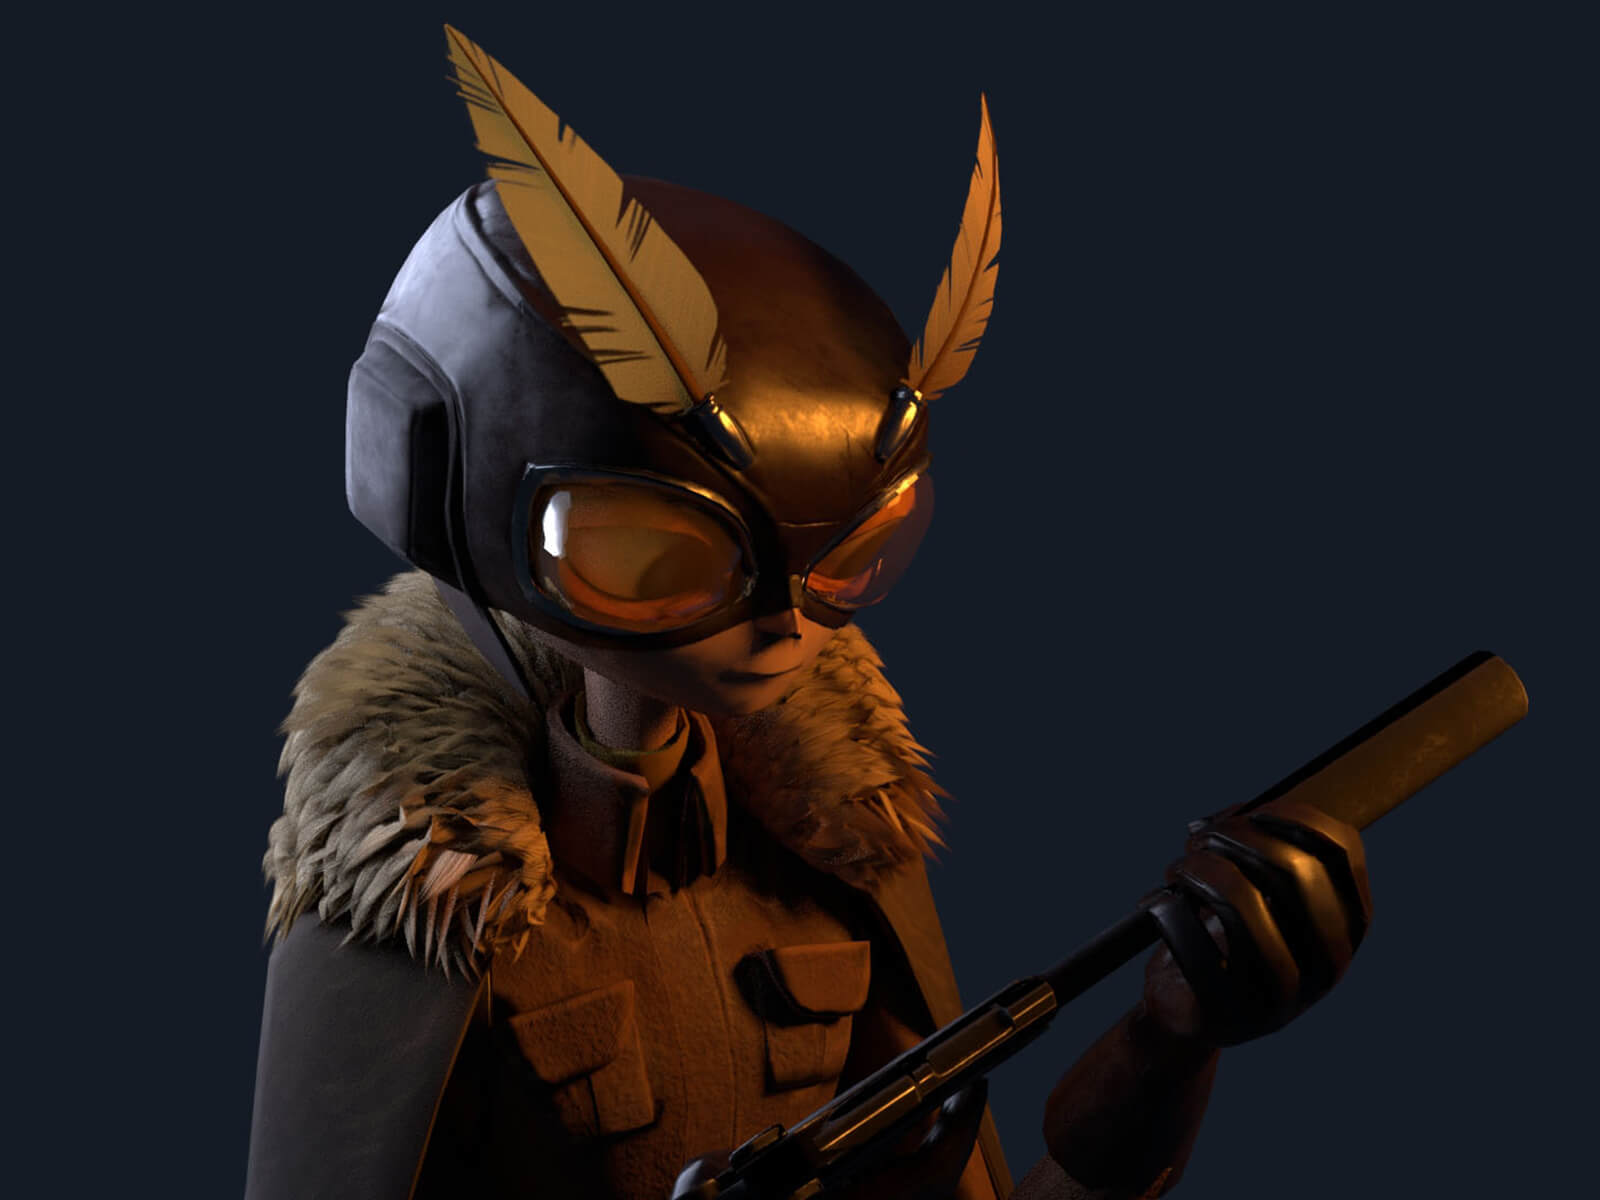 Close-up of a character in goggles with two feathers carrying a gun